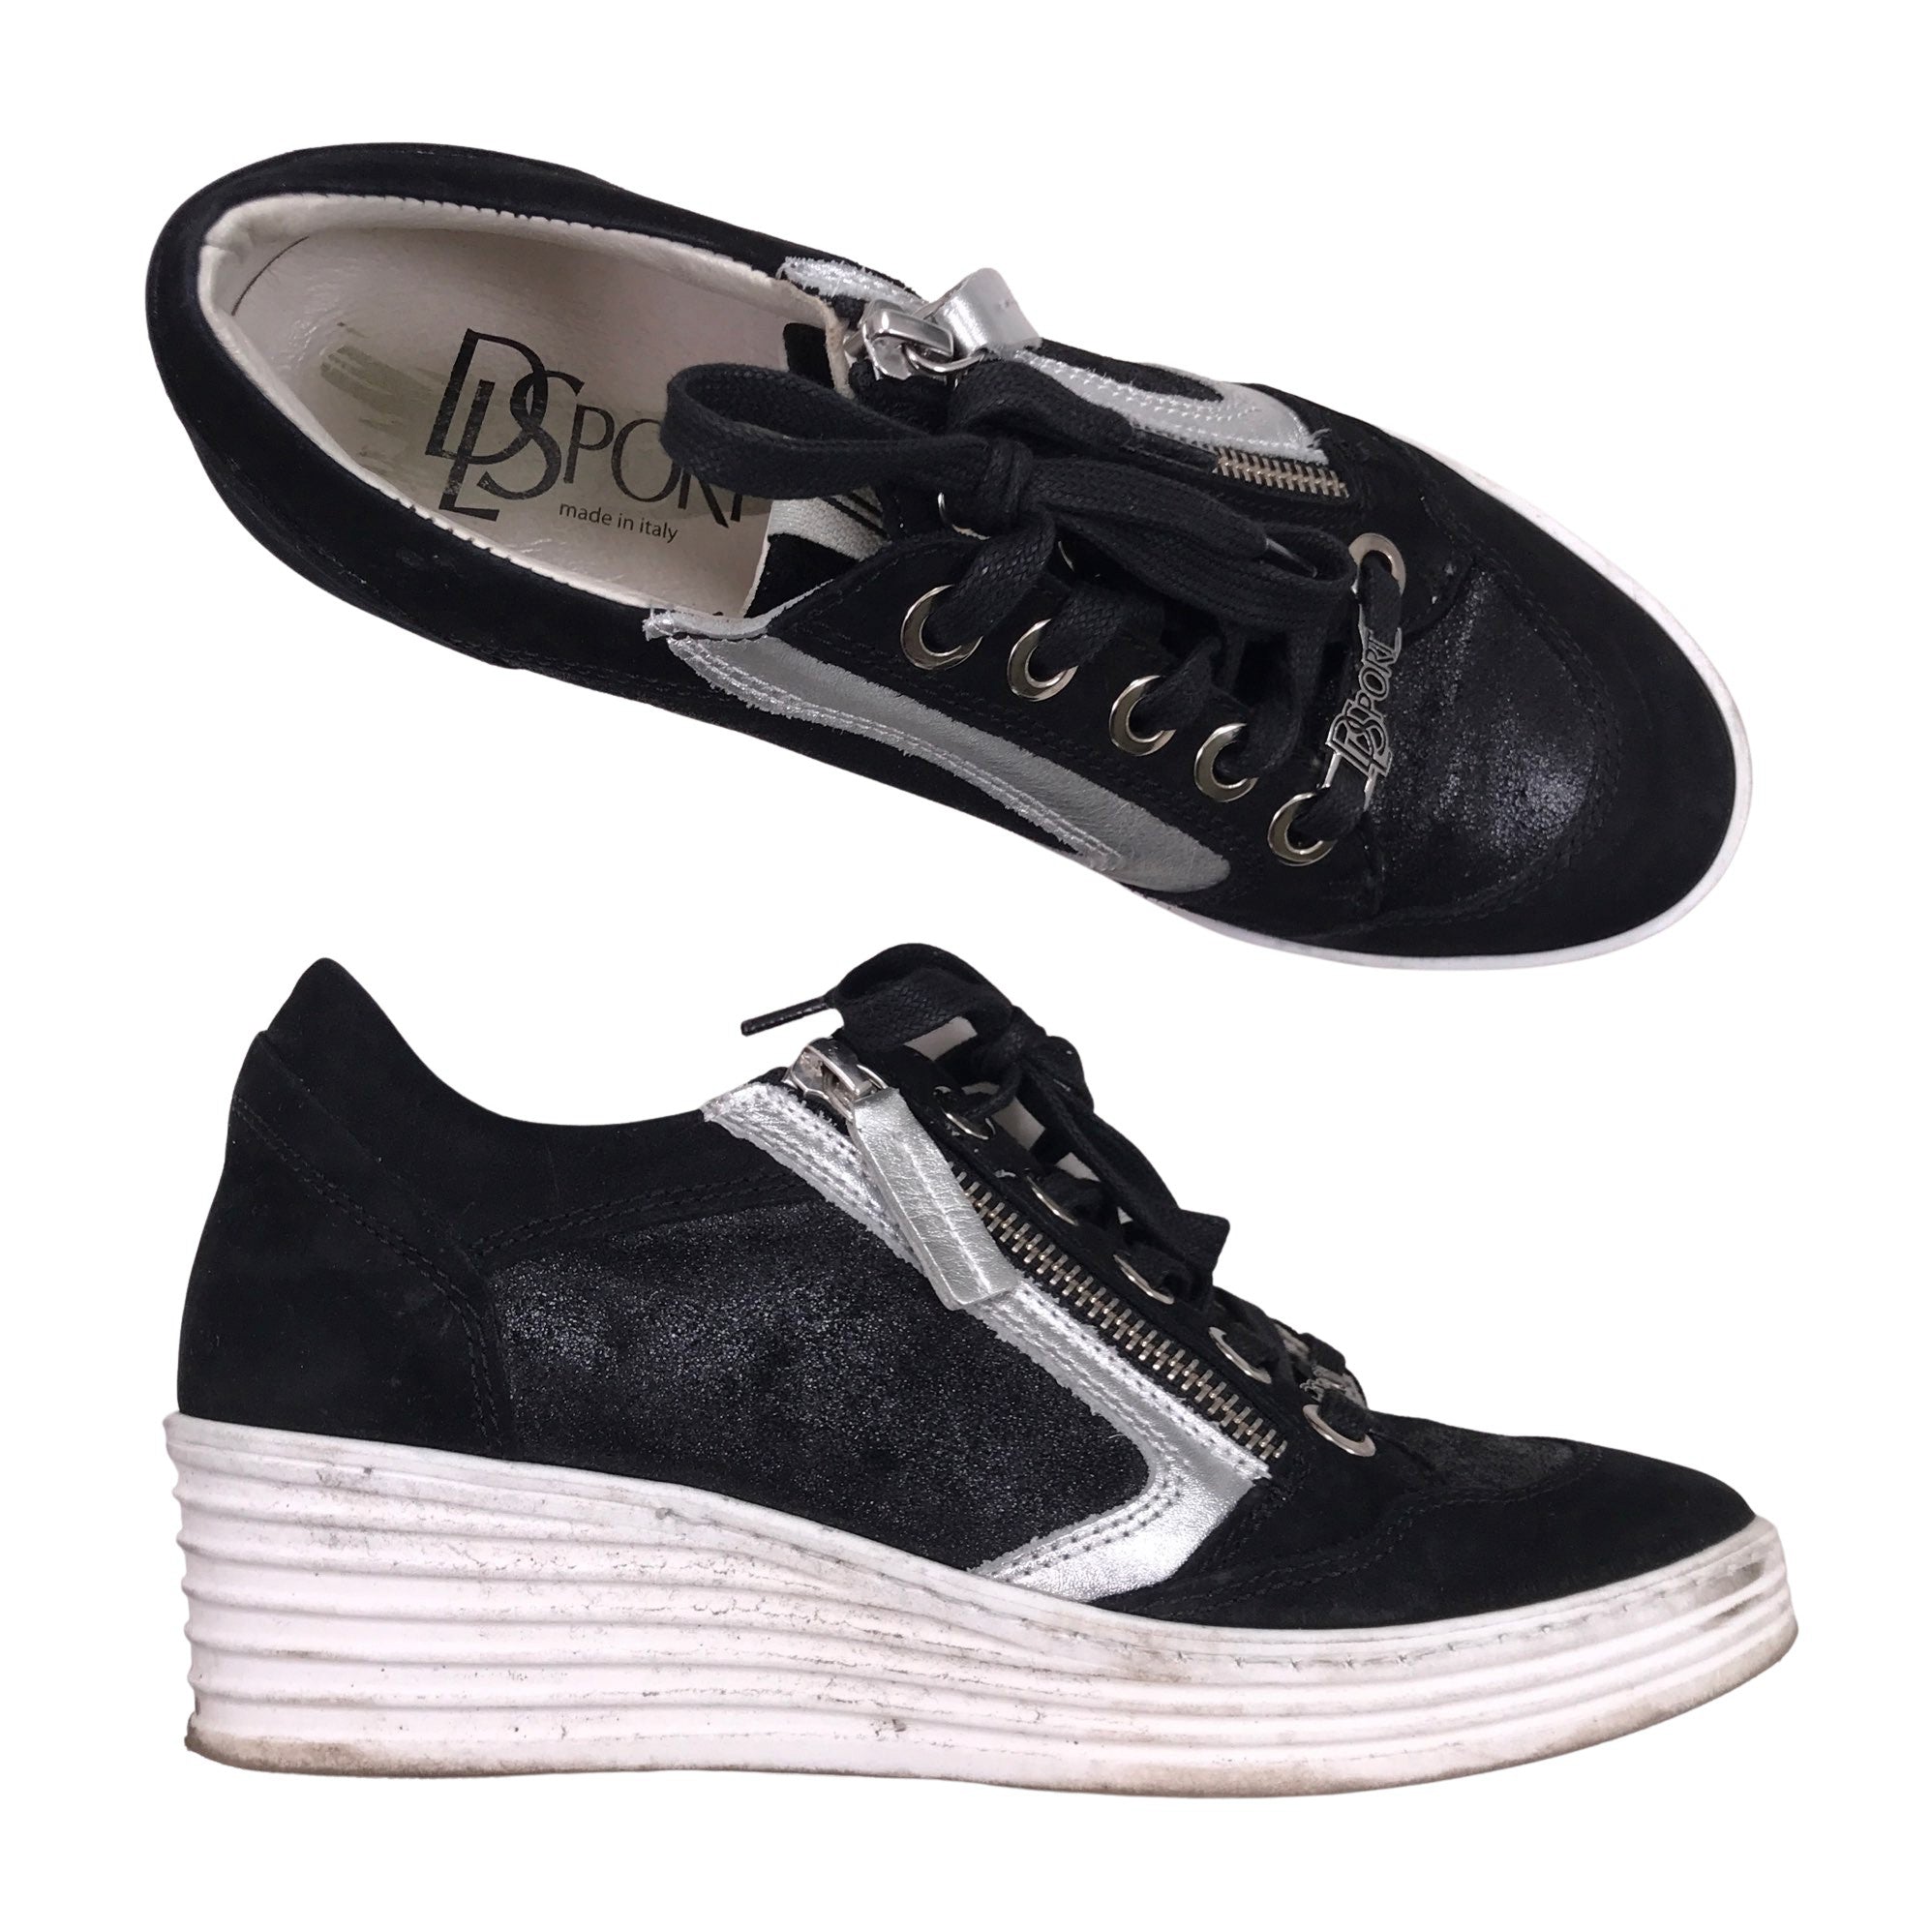 DLS Casual sneakers, size 37 (Black) Emmy